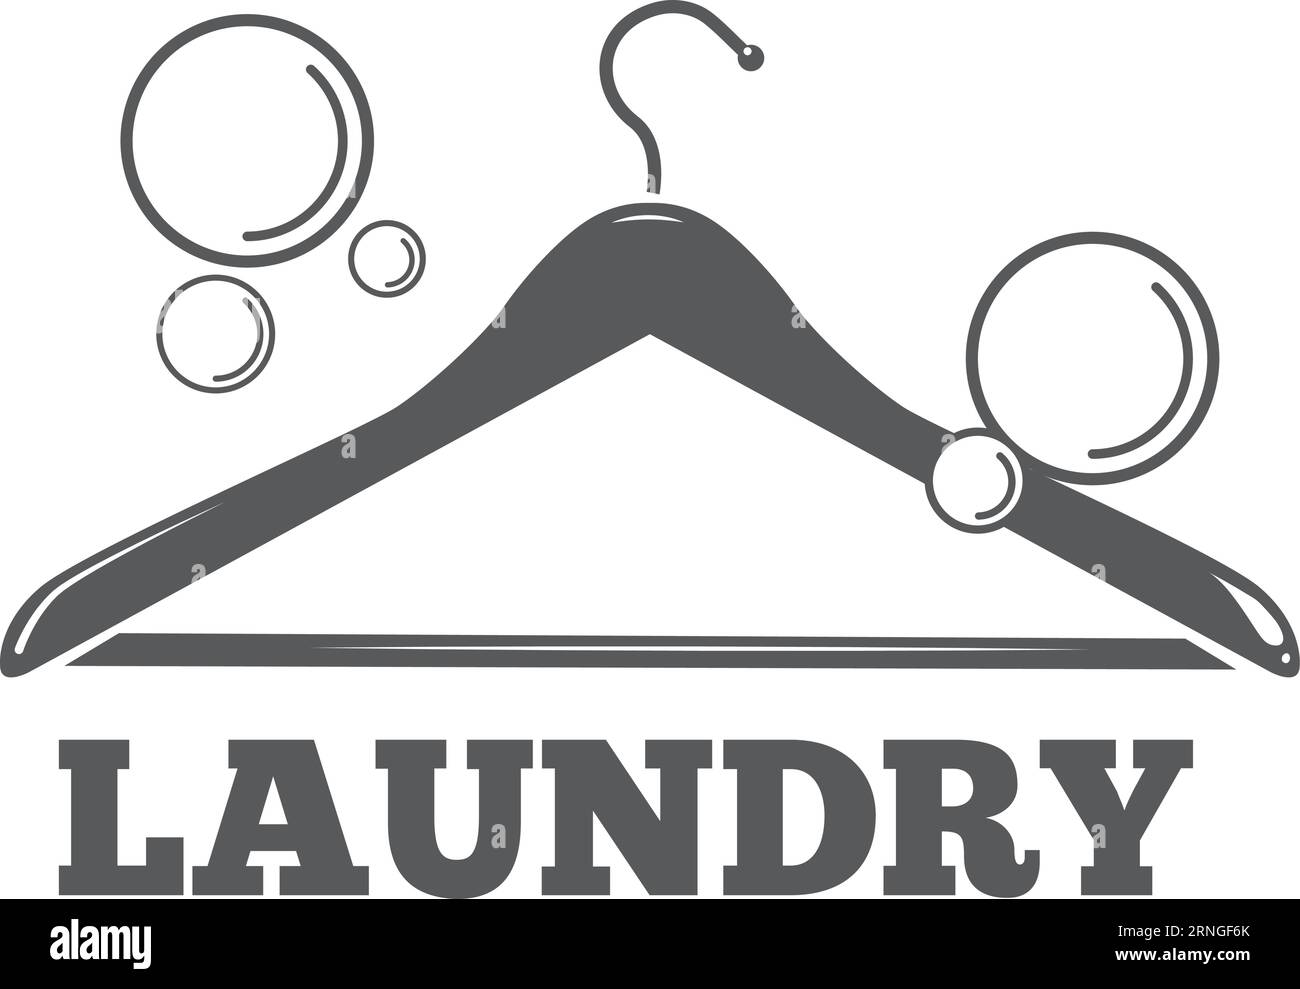 Laundry logo. Wooden clothing hanger and foam bubbles Stock Vector